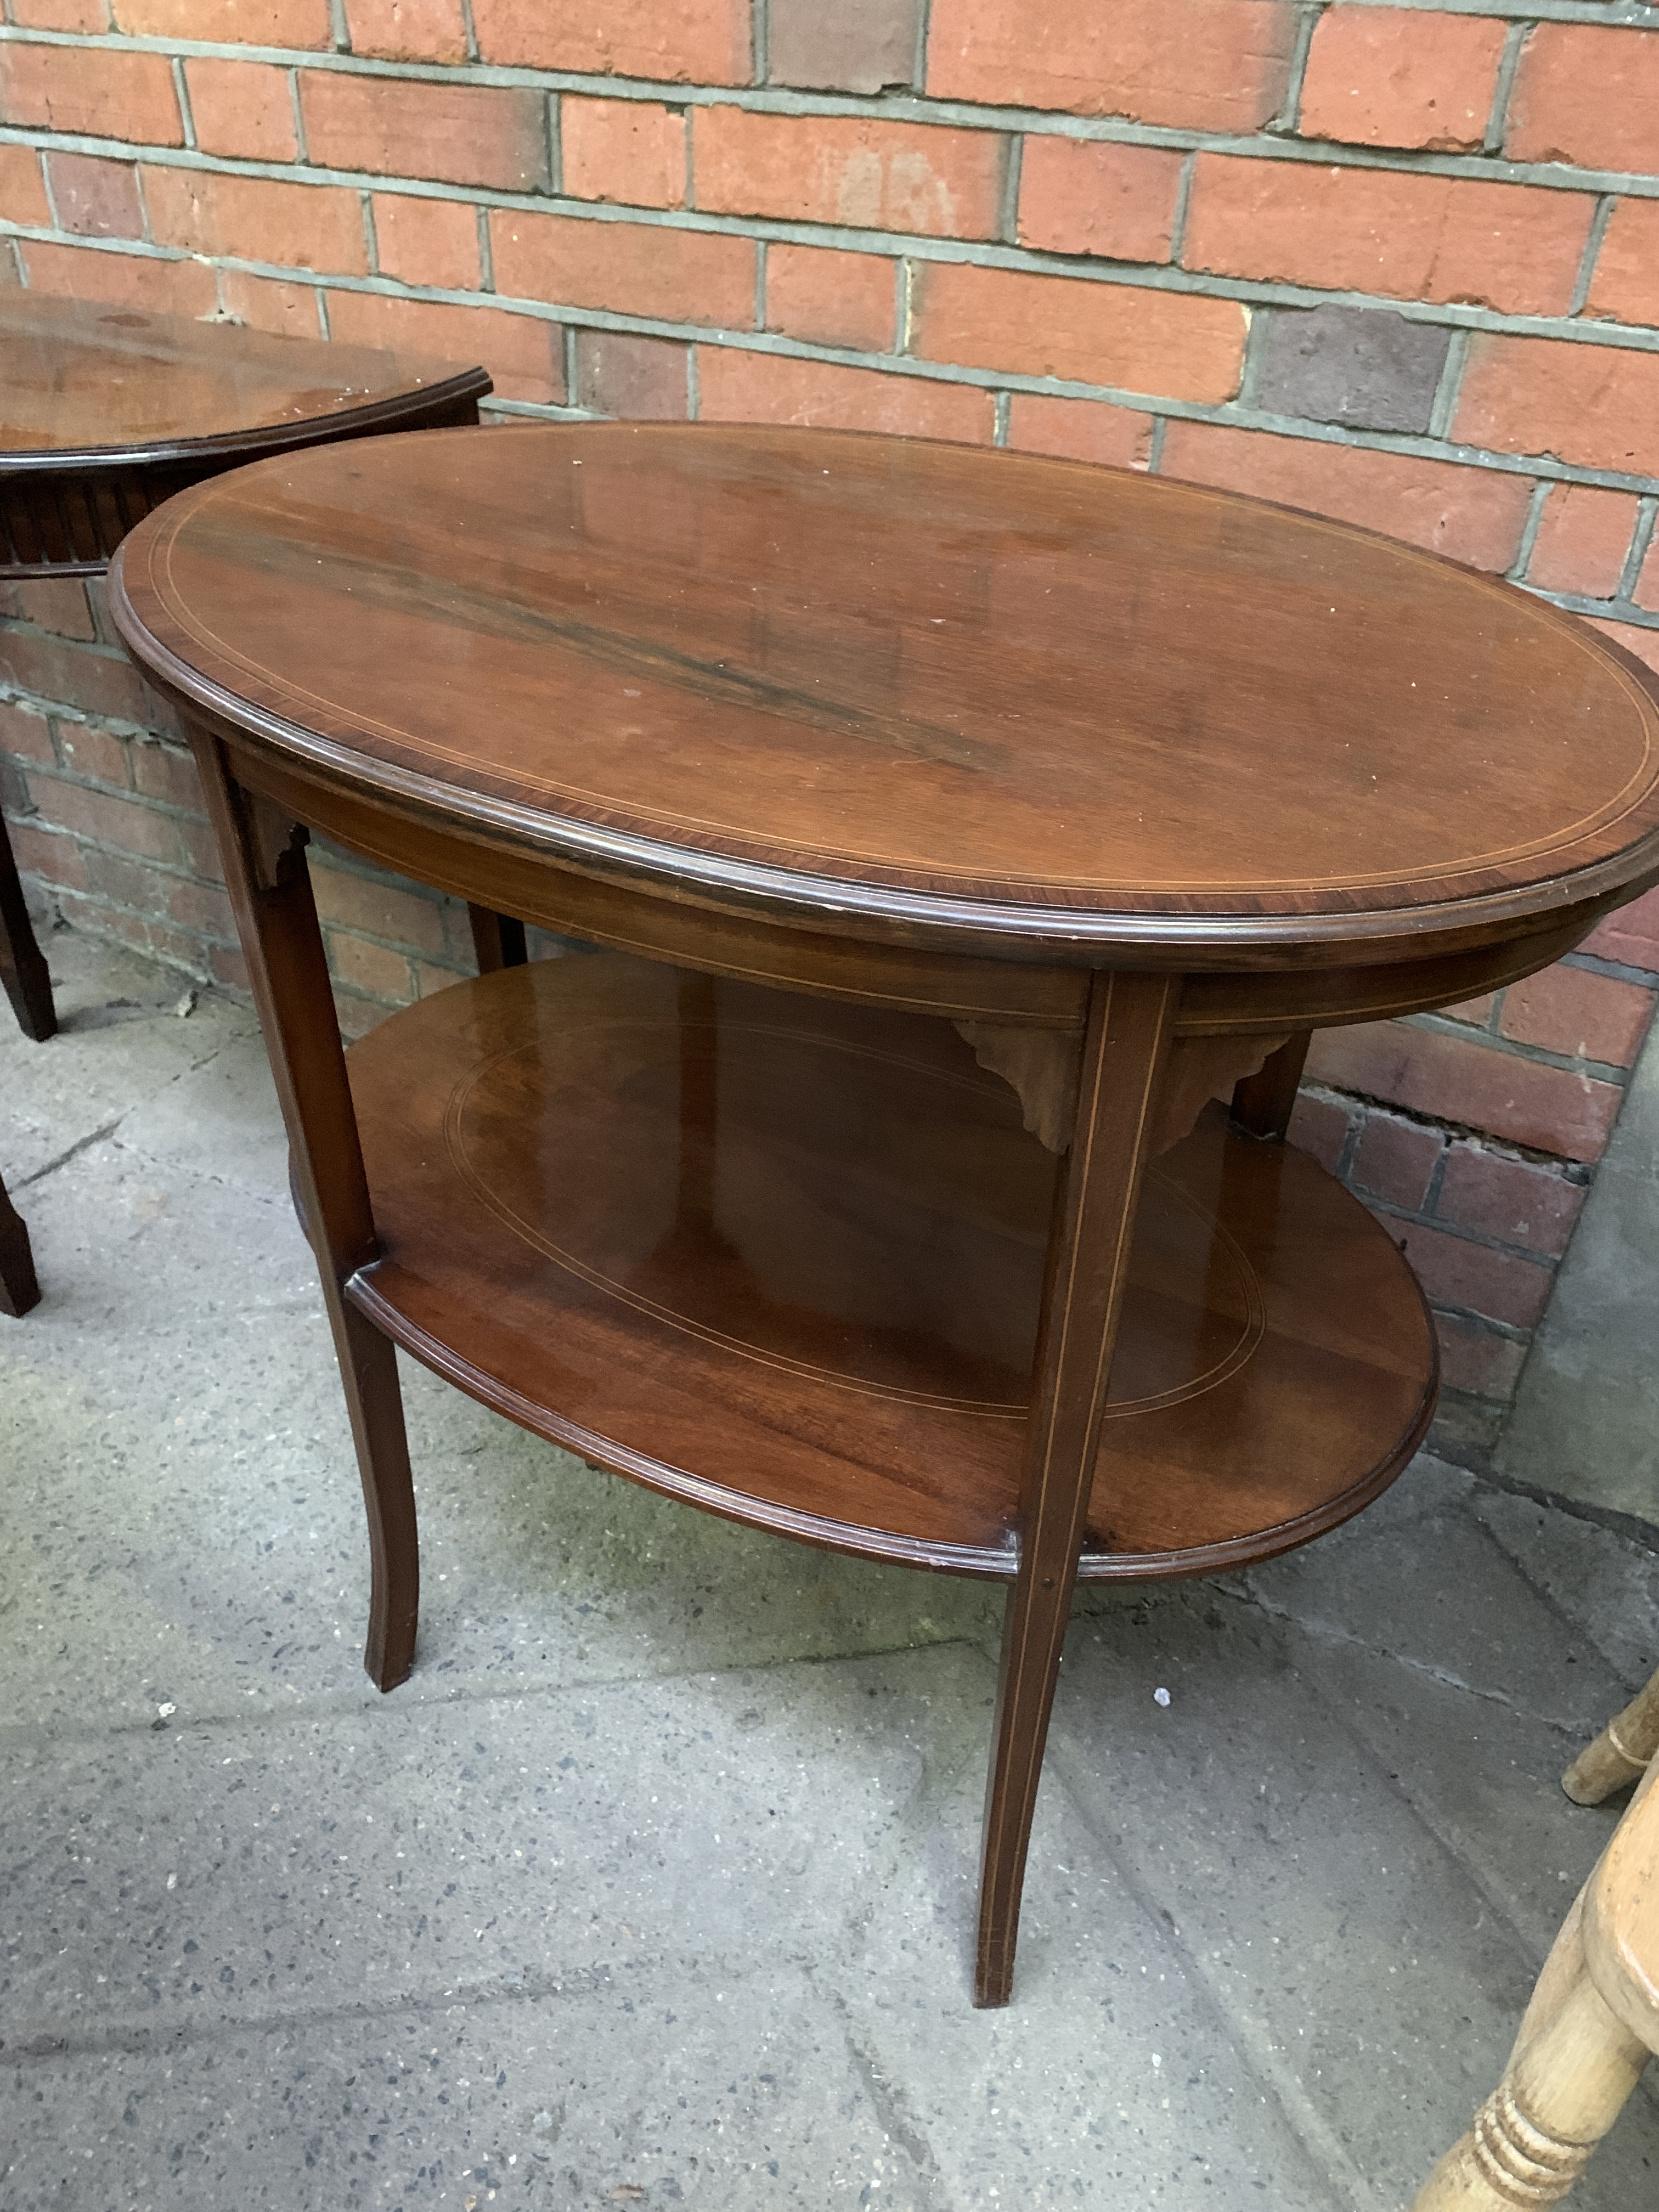 Banded inlaid mahogany oval display table together with small mahogany demi-lune table